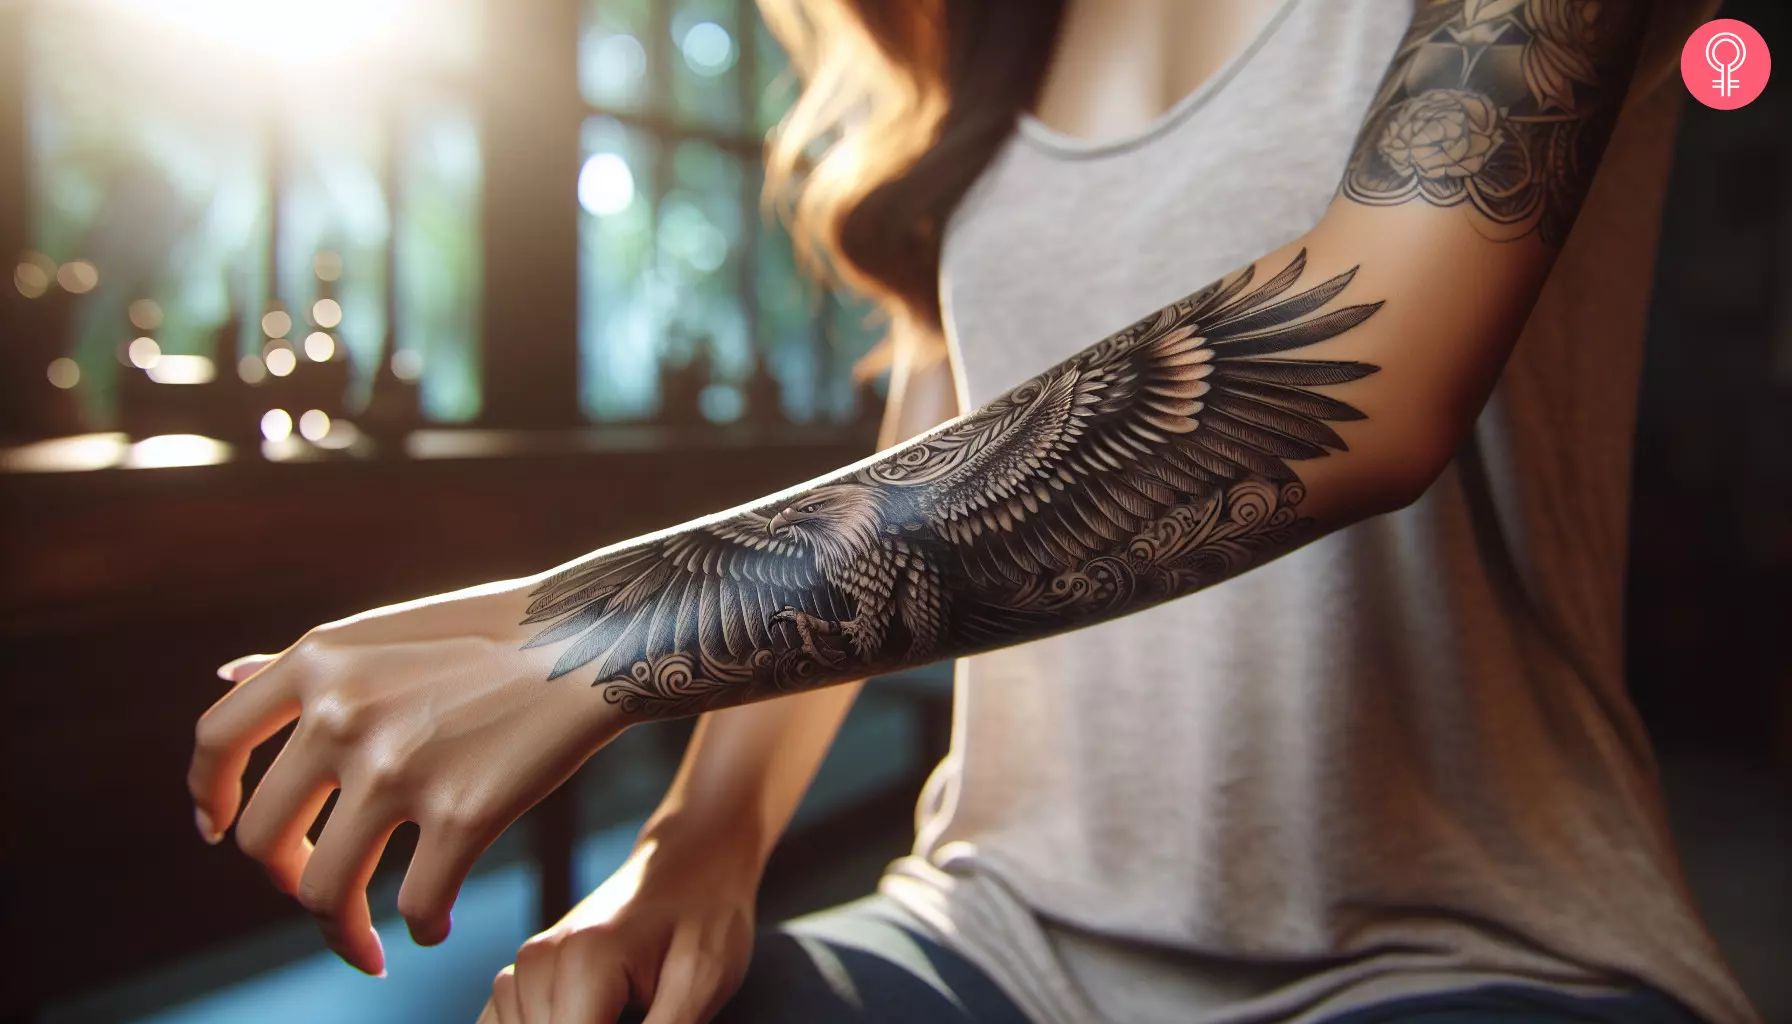 An eagle tattoo design on the forearm of a woman